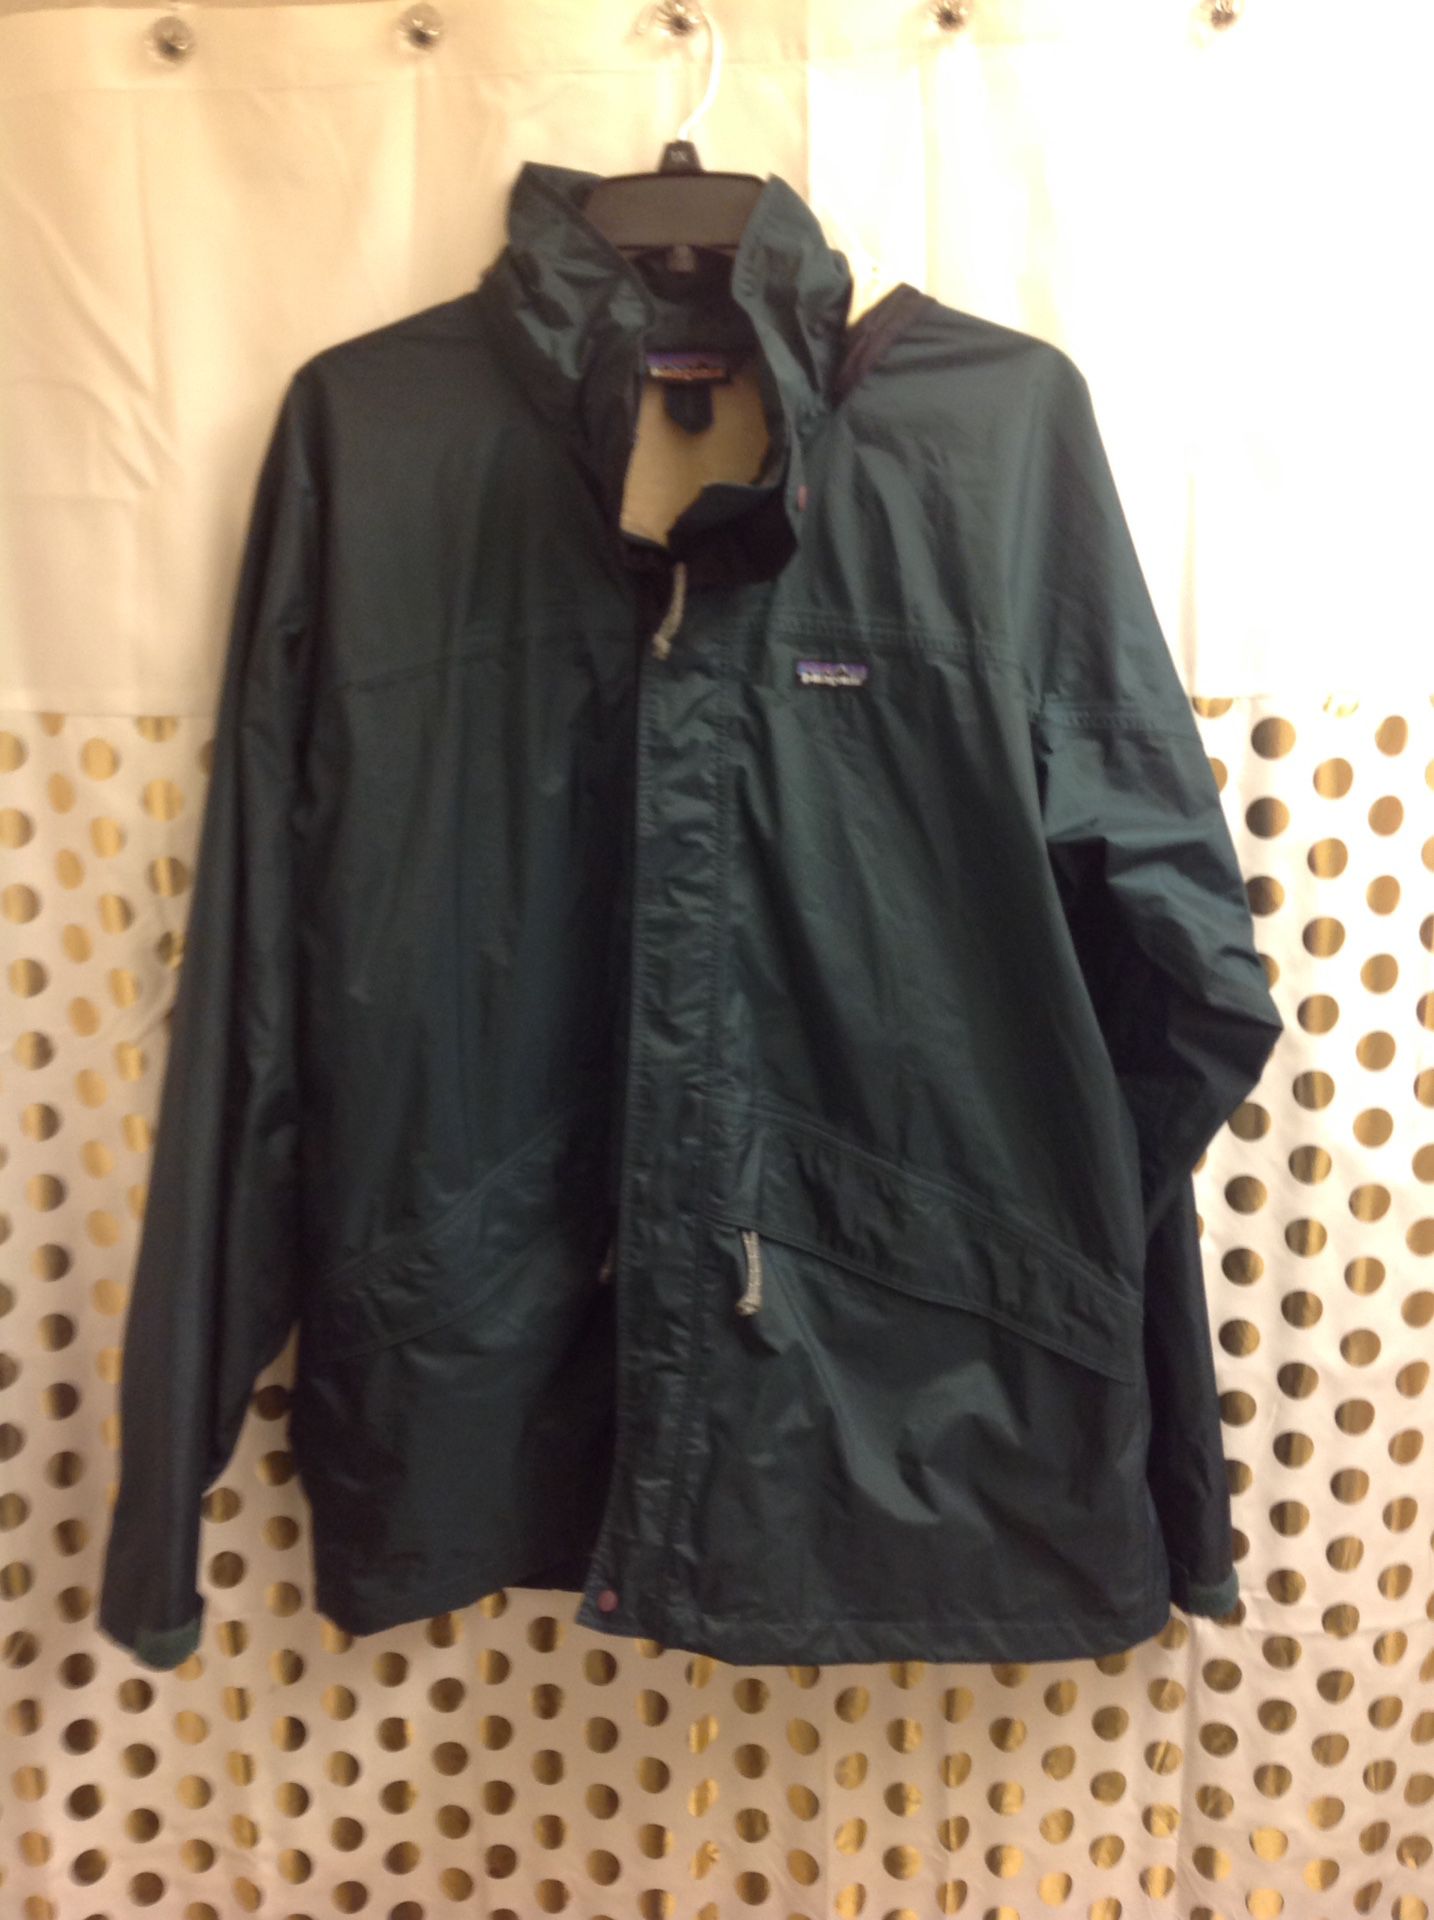 patagonia rain jacket Waterproof windbreaker Men XL dark Forrest emerald green color Only flaw is at the hood, see photos. Priced accordingly